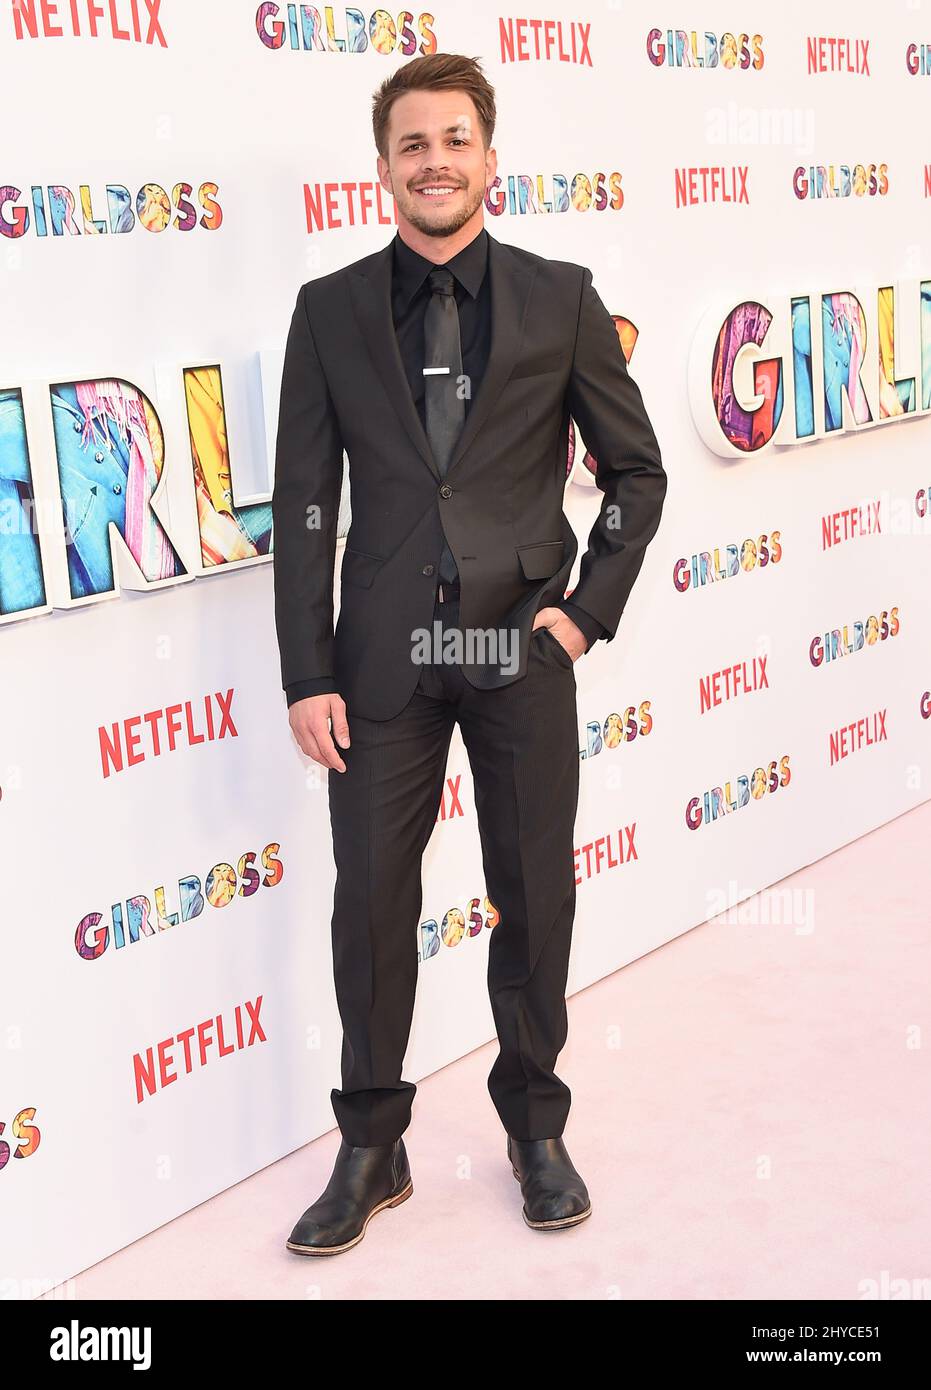 Johnny Simmons attending the 'Girlboss' Los Angeles premiere held at the ArcLight Cinemas Hollywood Stock Photo